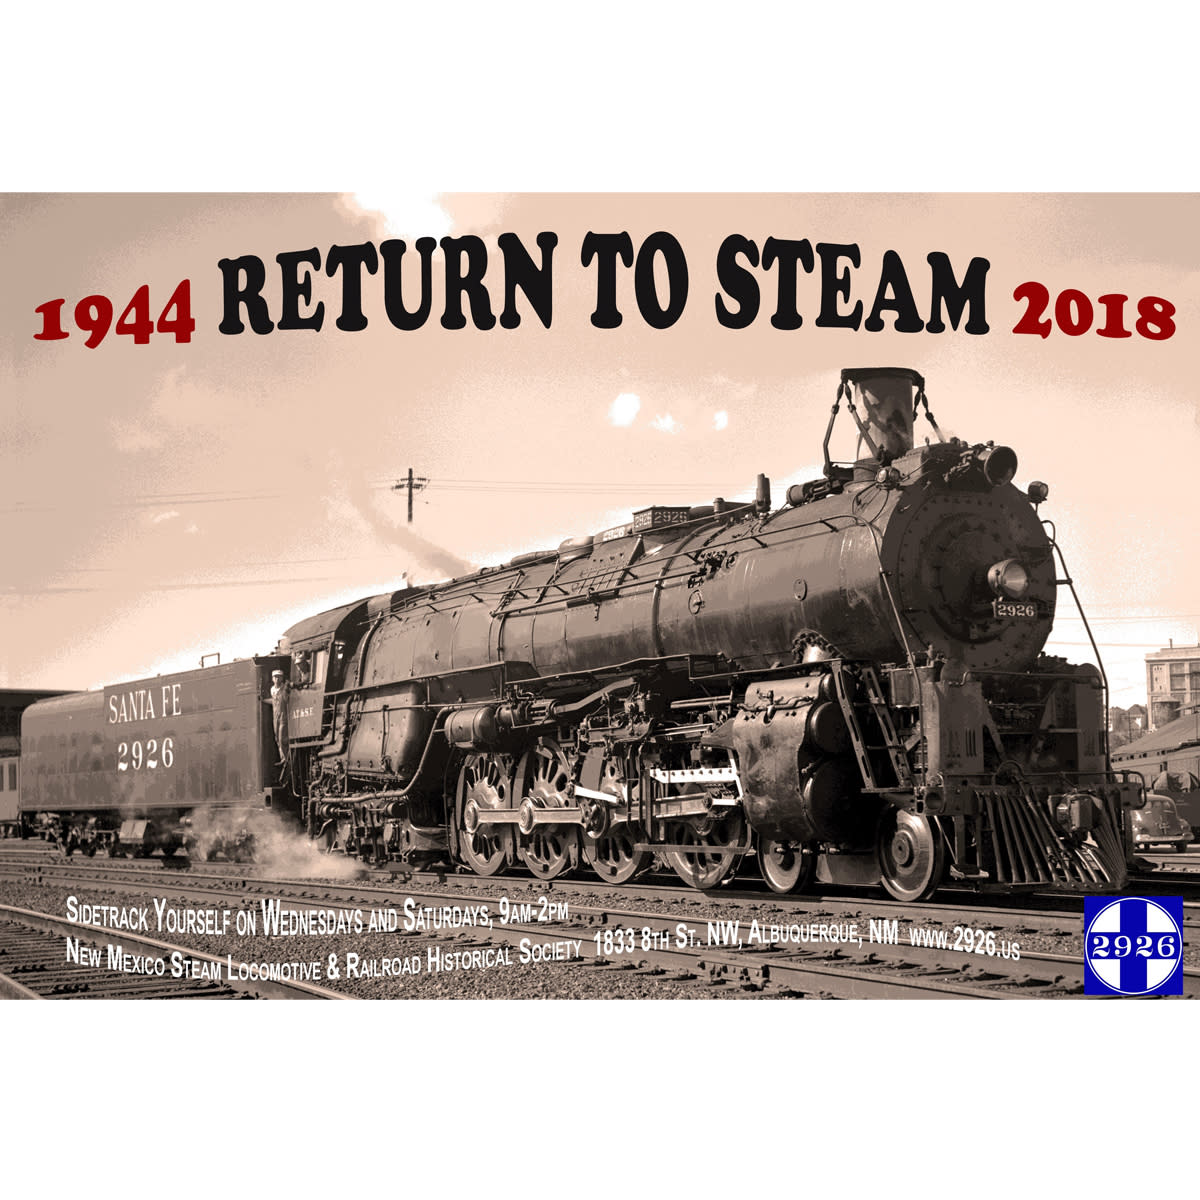 New Mexico Steam Locomotive And Railroad Historical Society